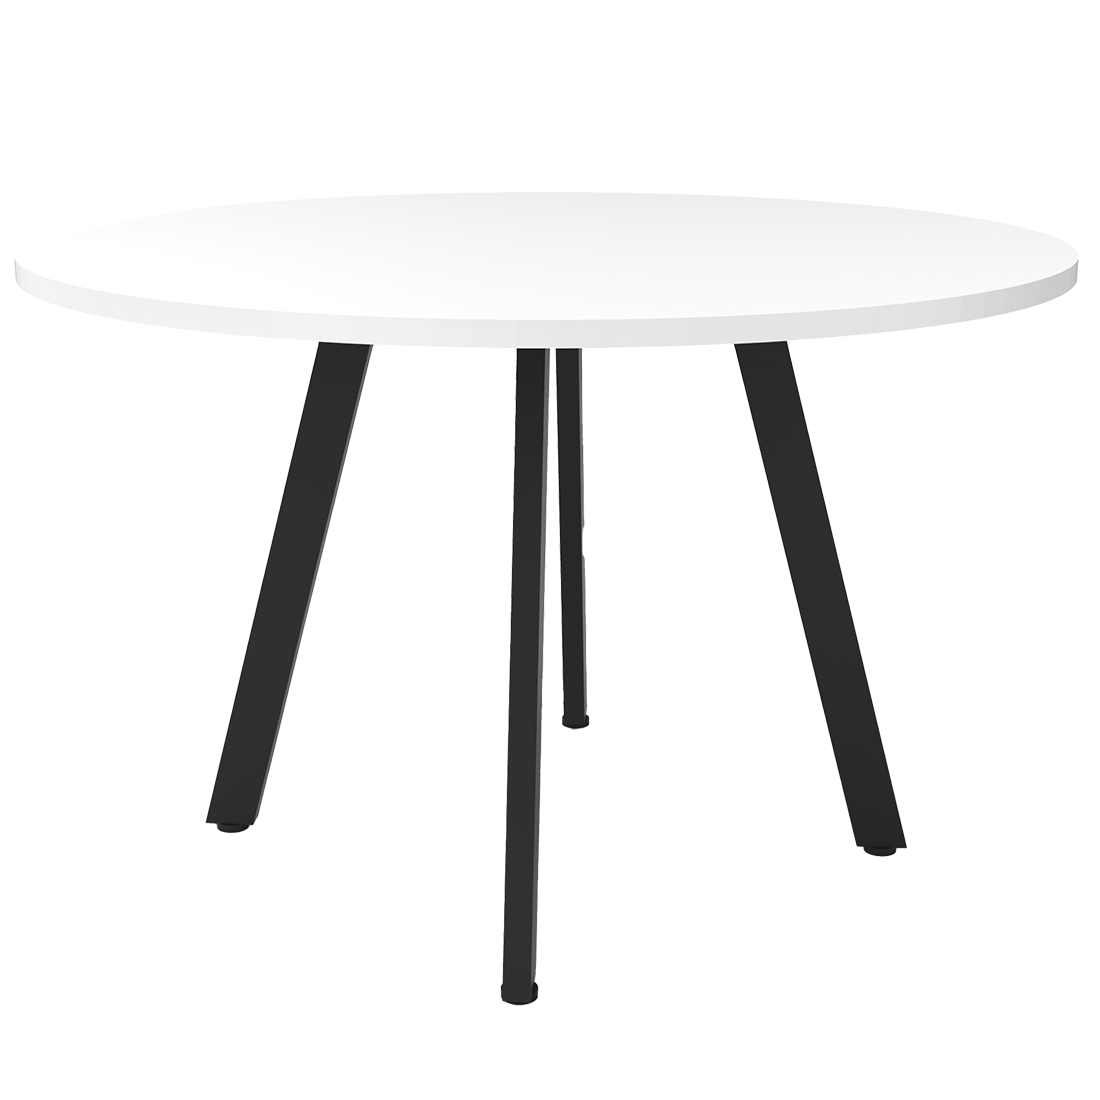 Deluxe Eternity Round Meeting Table - switchoffice.com.au